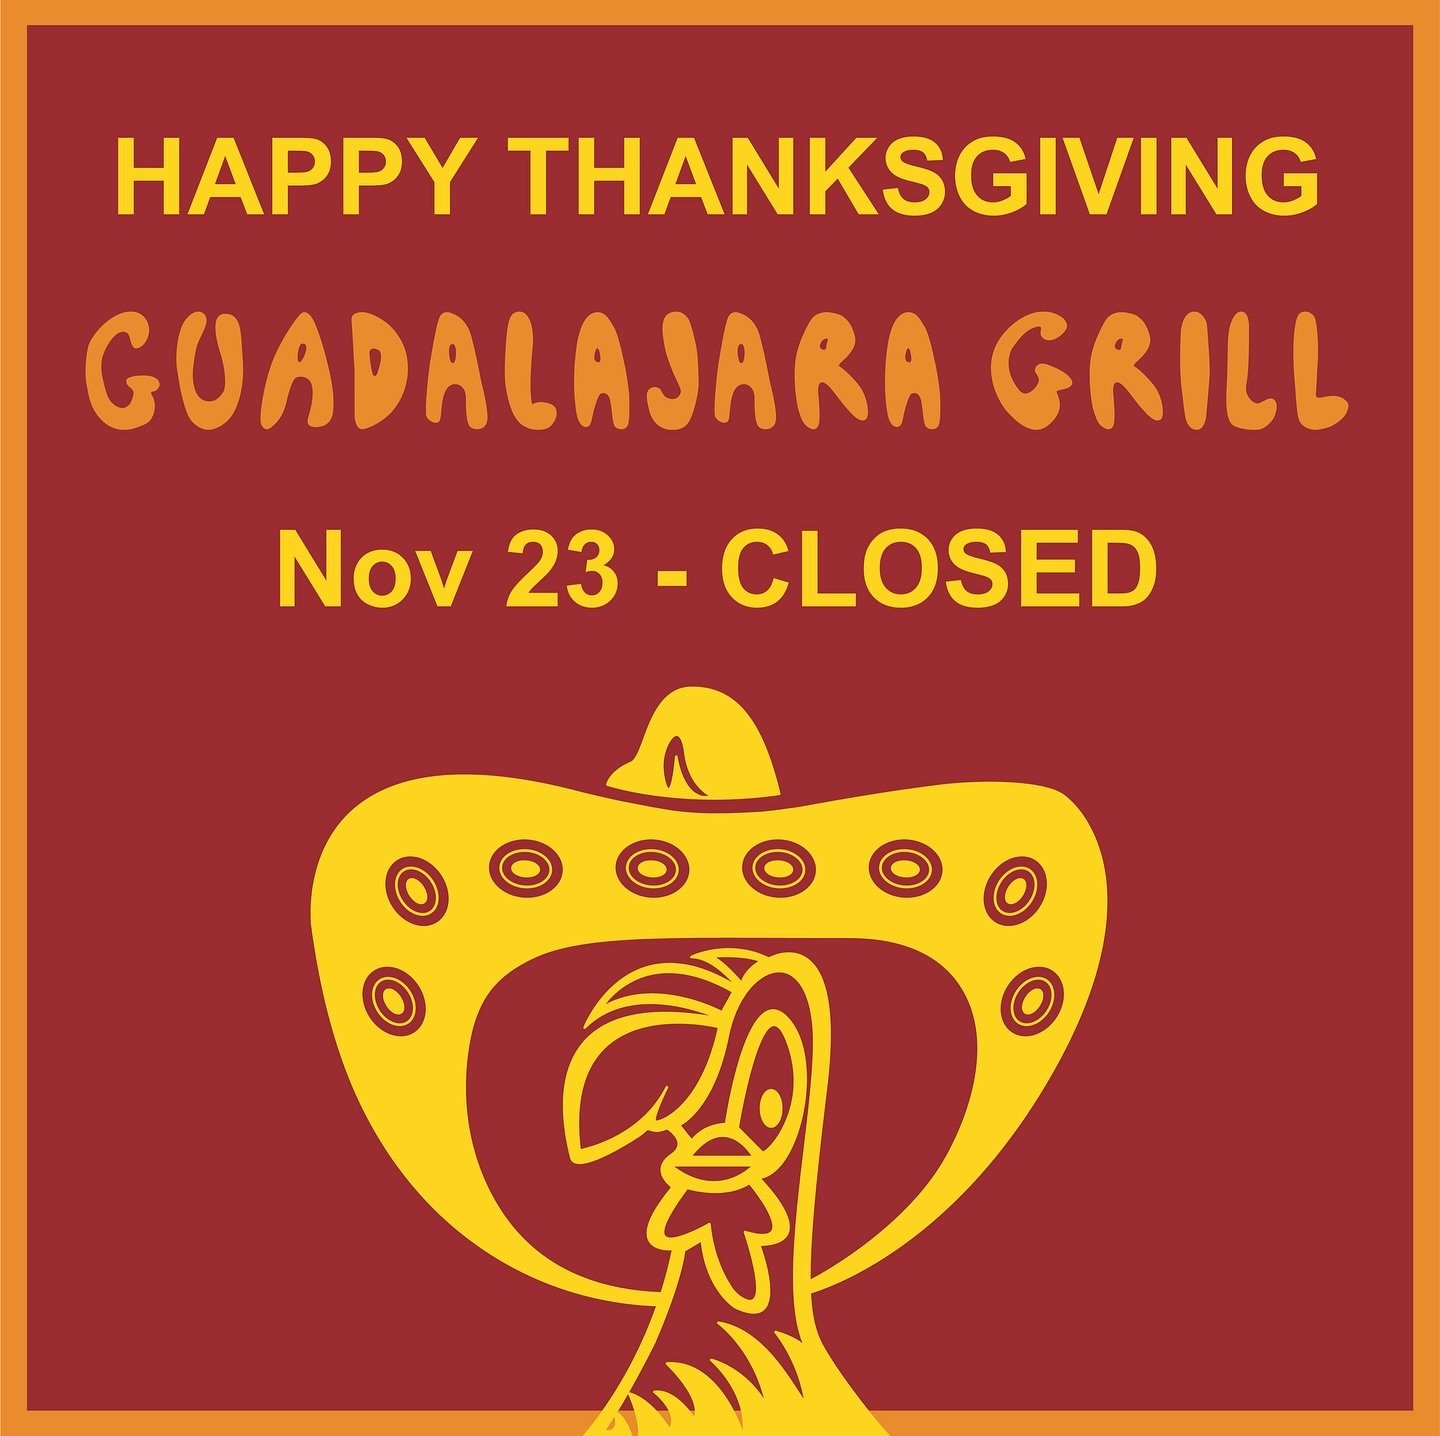 Guadalajara Grill will be closed today for Thanksgiving, but will resume regular business hours on Friday (11/24). Happy Thanksgiving from the Guad Grill Familia.

#hotplatehotplate #guadgrill #thanksgiving